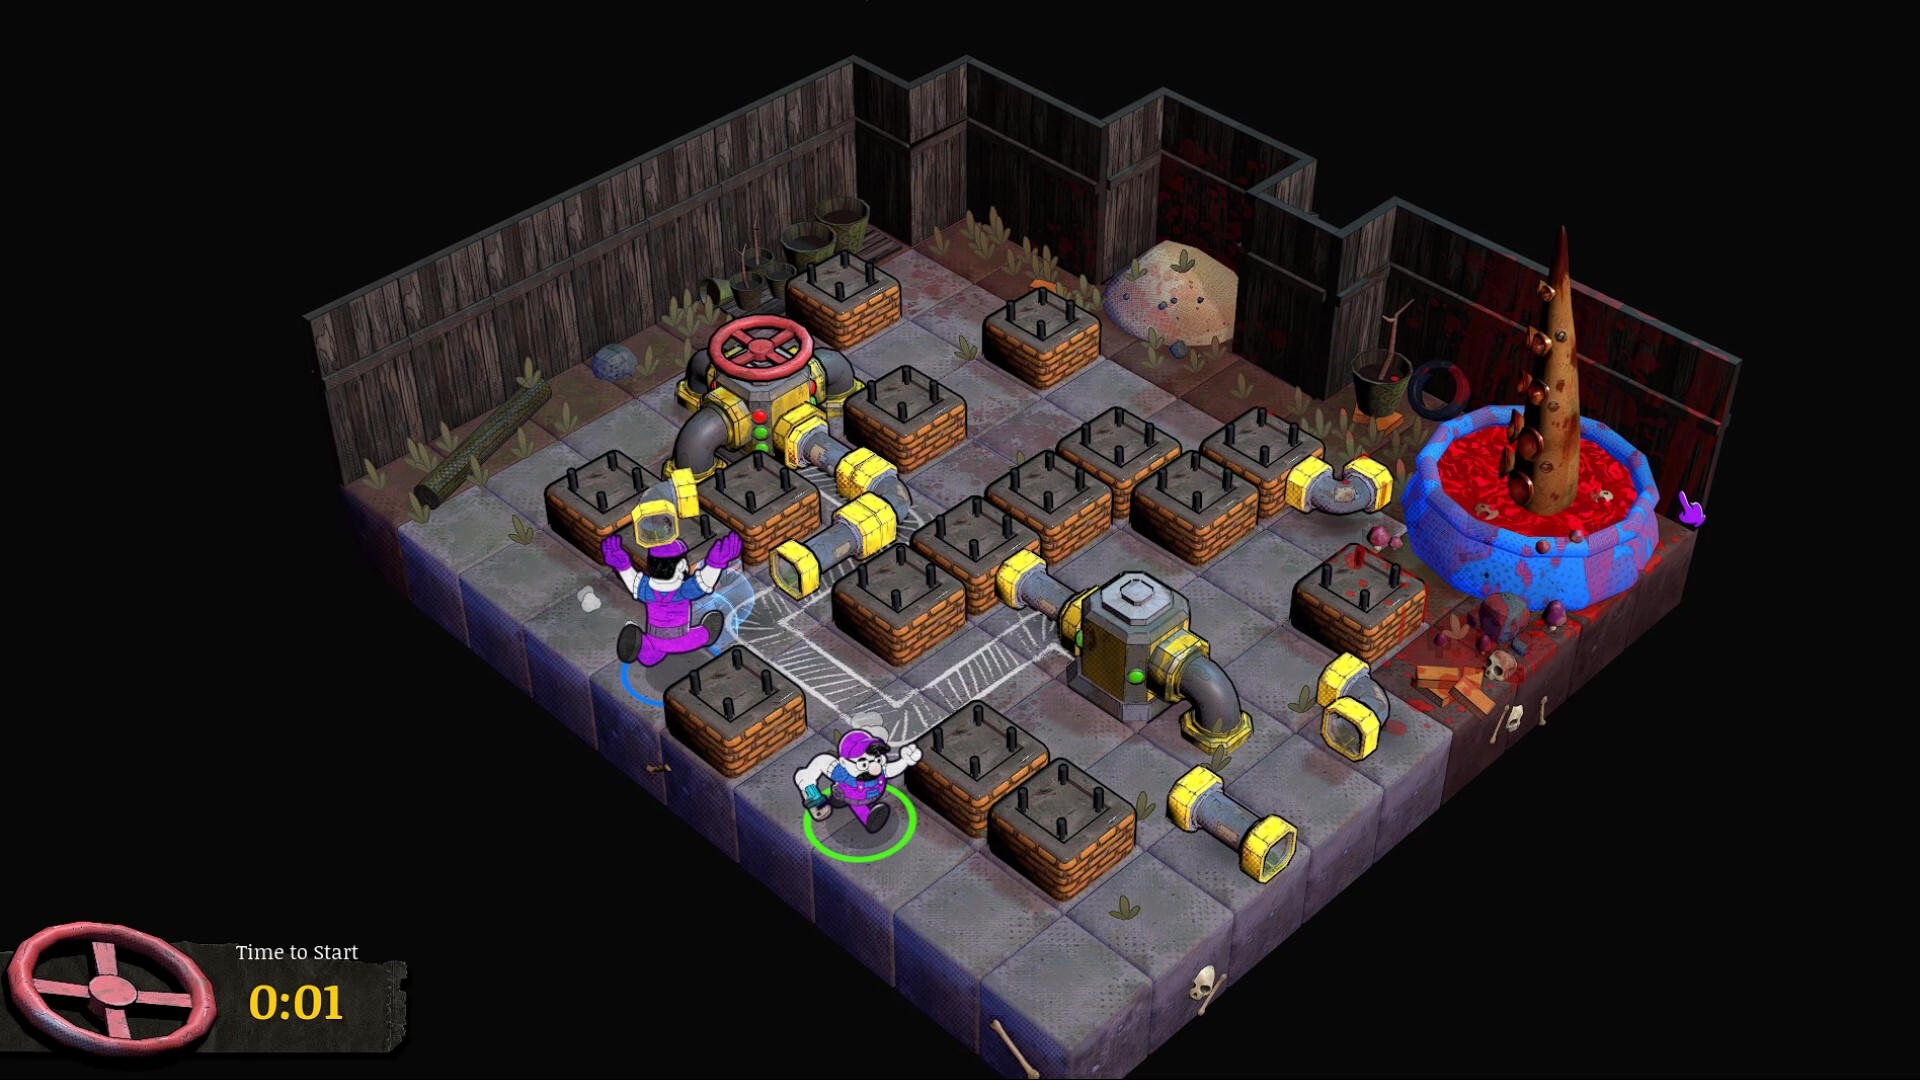 Screenshot of Just Plumbers in Hallowville